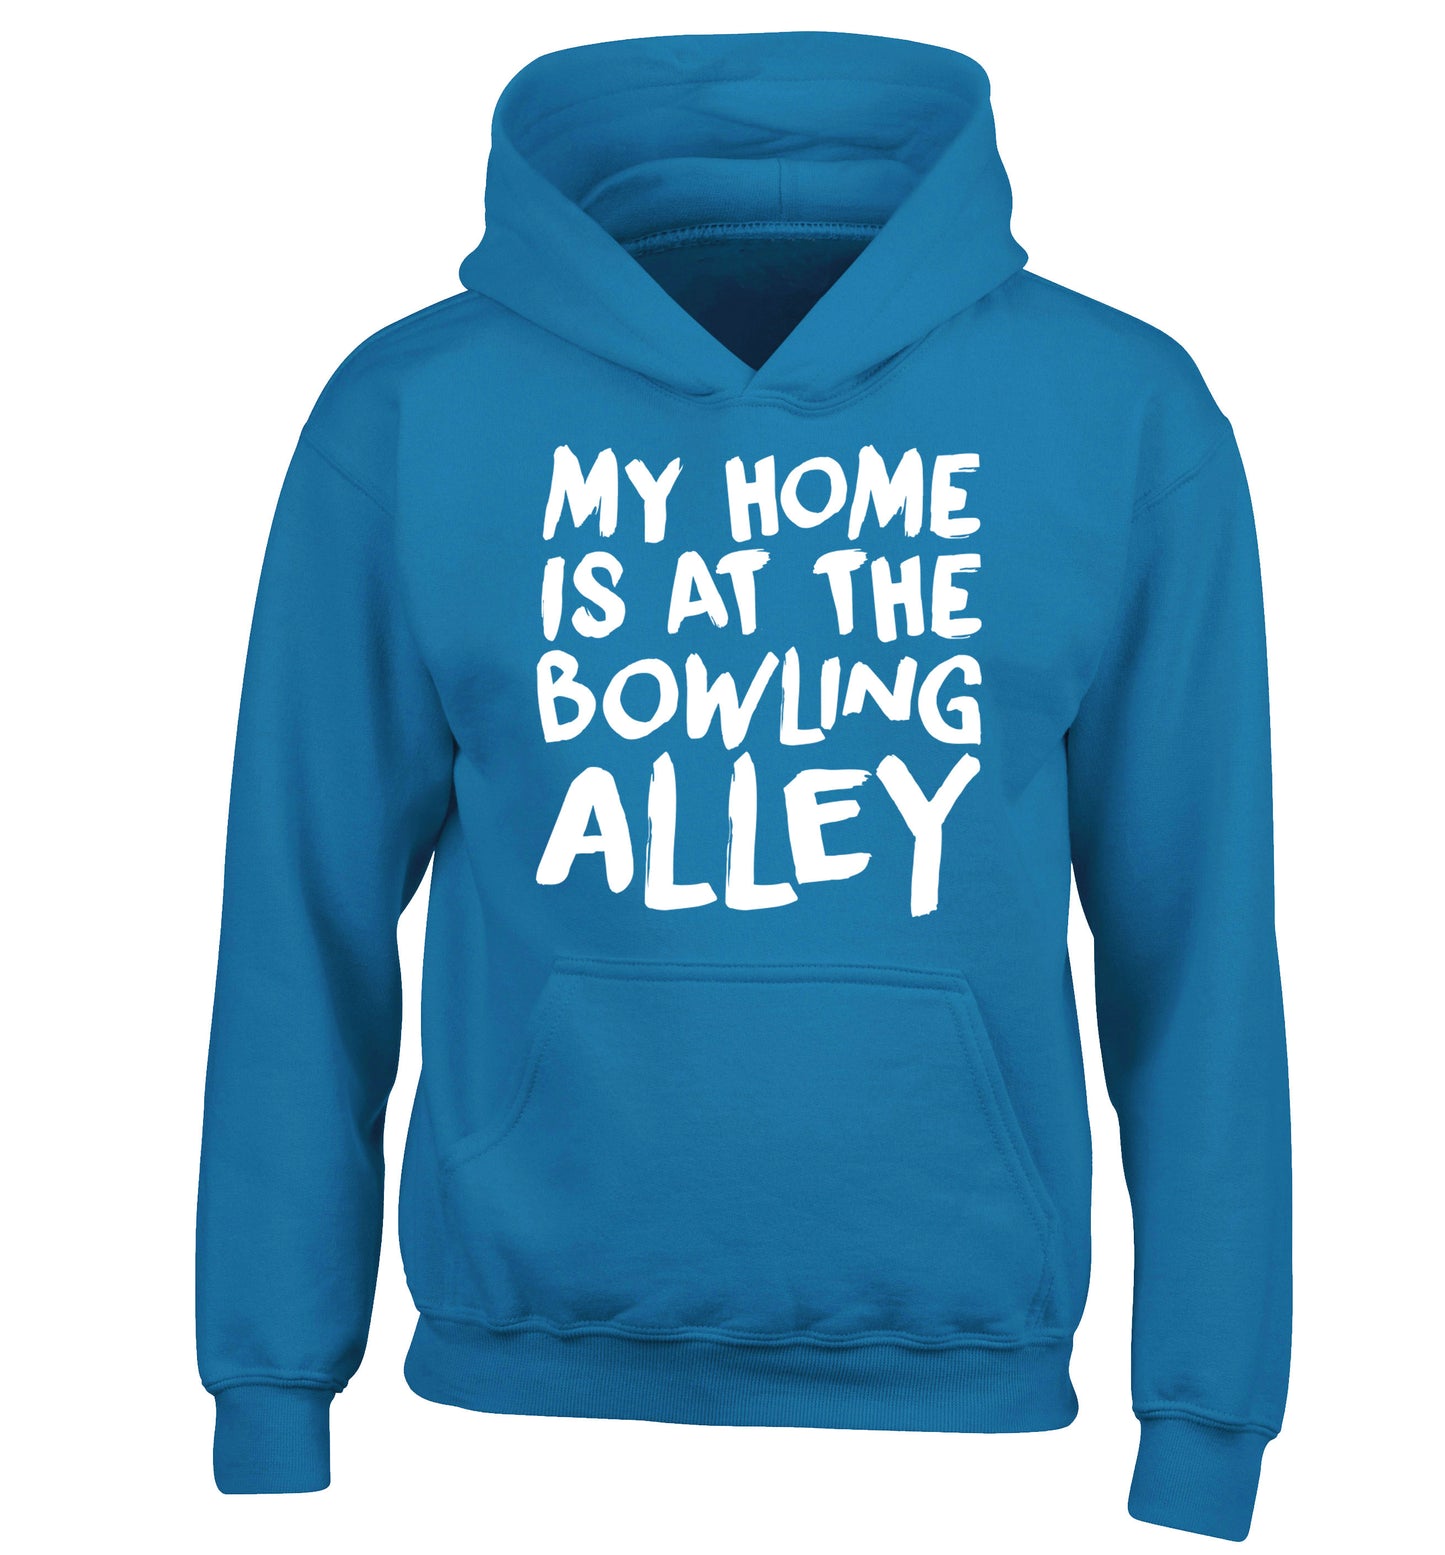 My home is at the bowling alley children's blue hoodie 12-14 Years